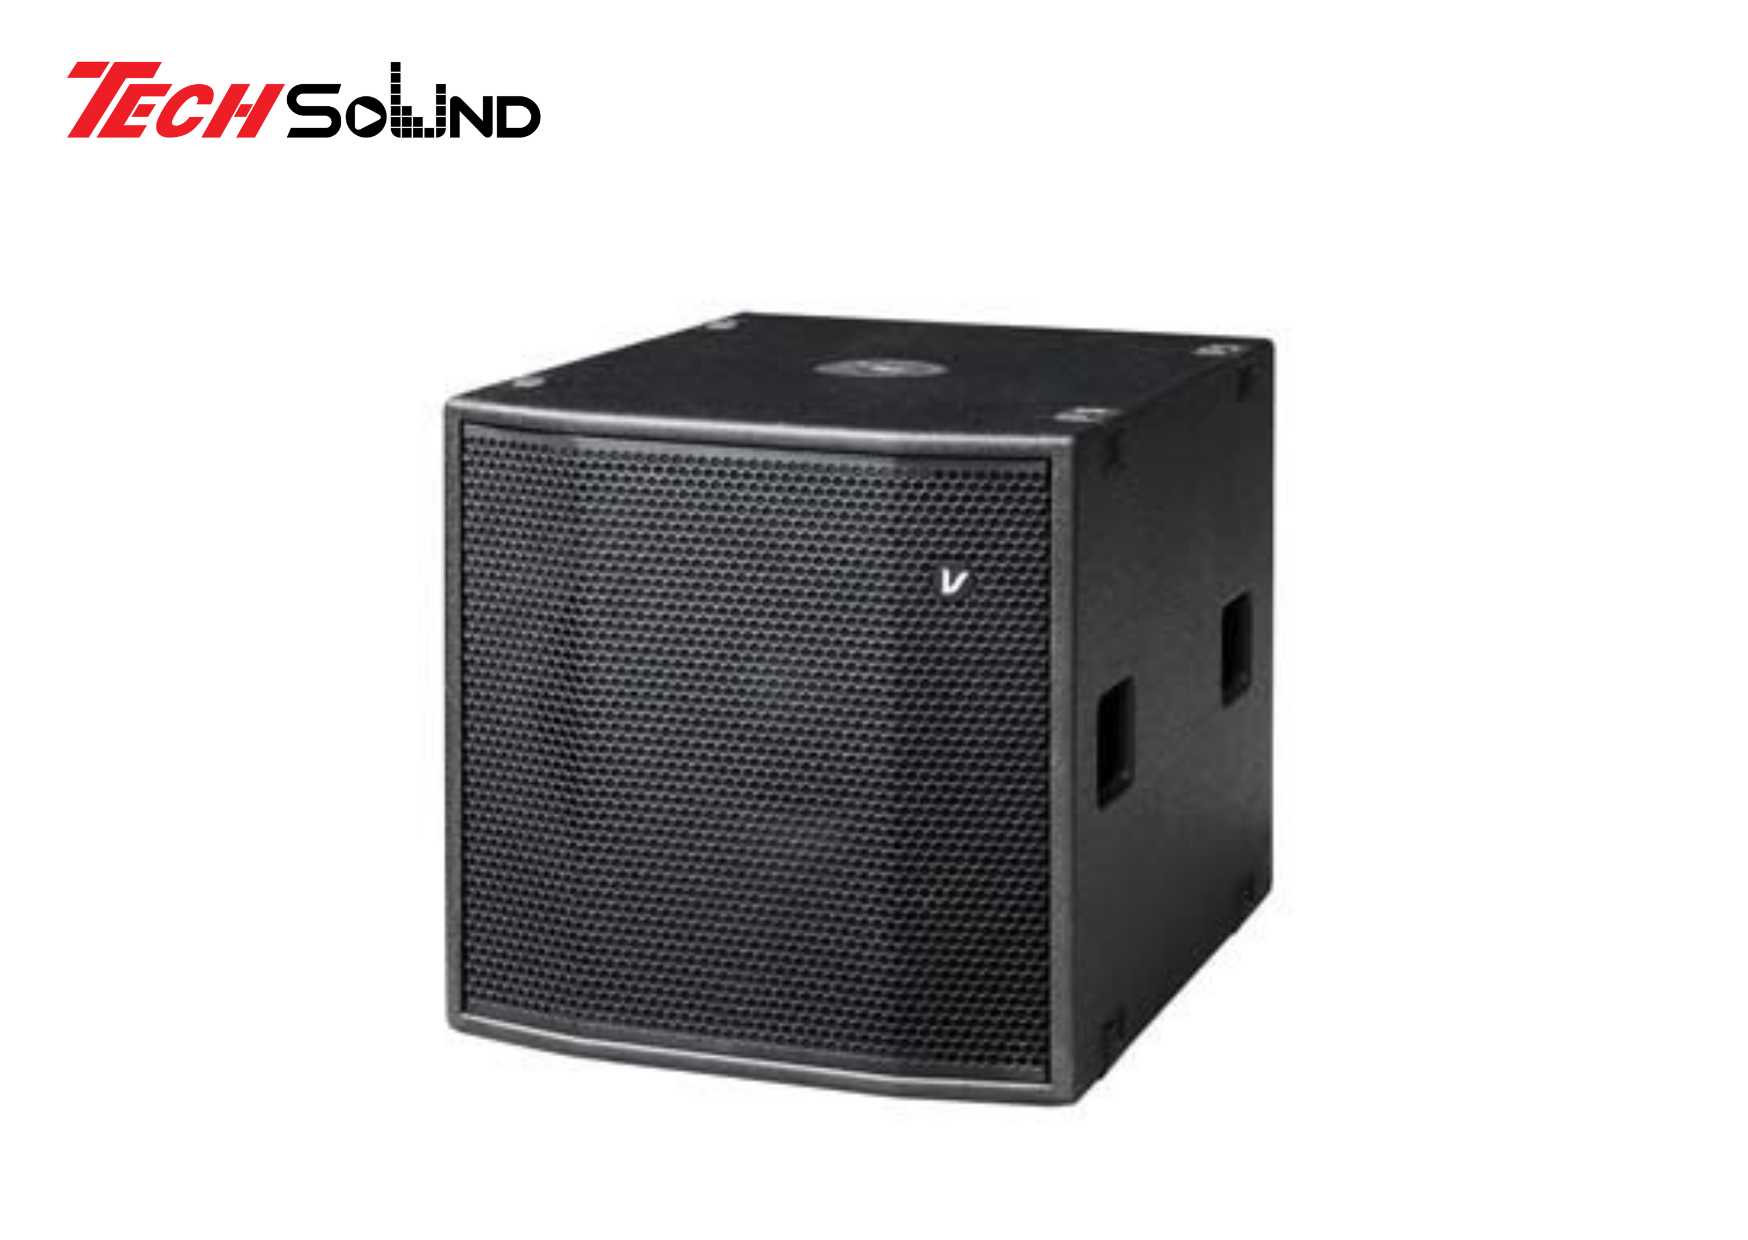 hinh anh Loa subwoofer Passive Verity SUB115 so 1